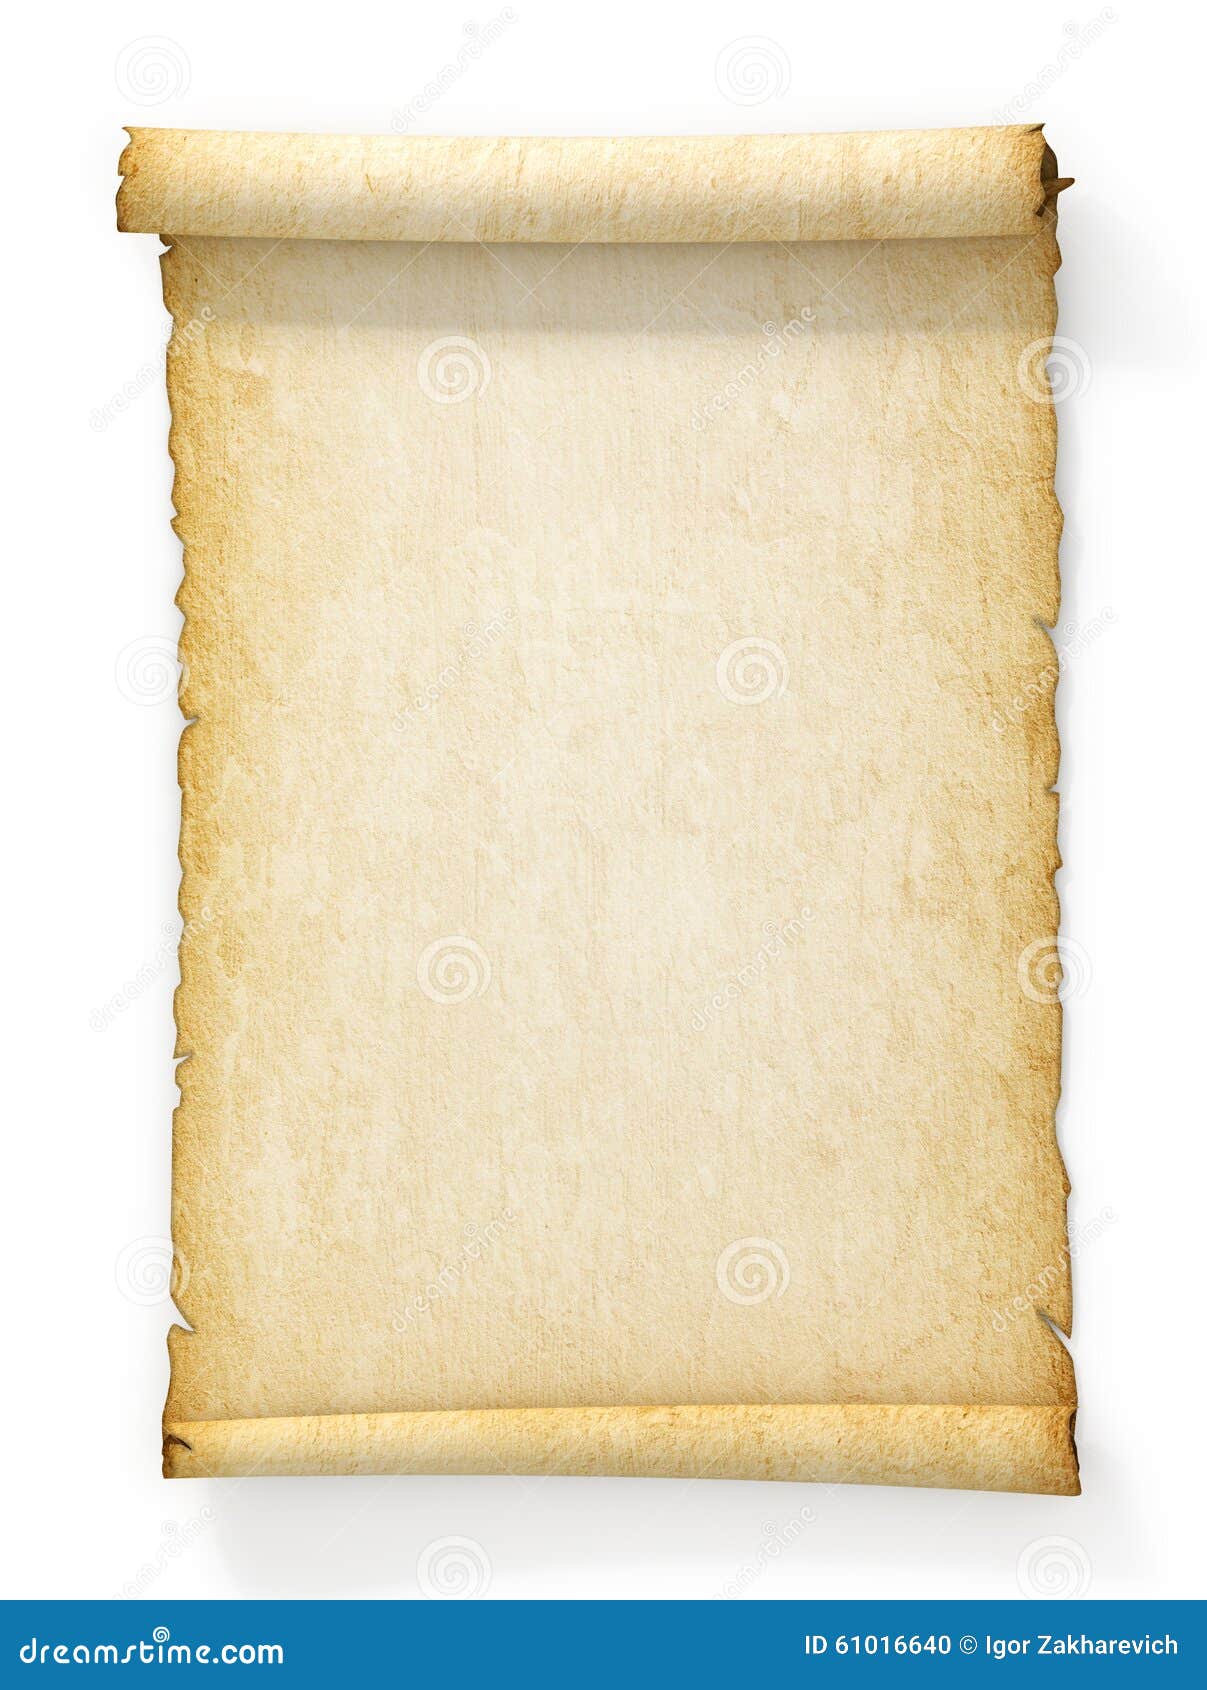 scroll of old yellowed paper